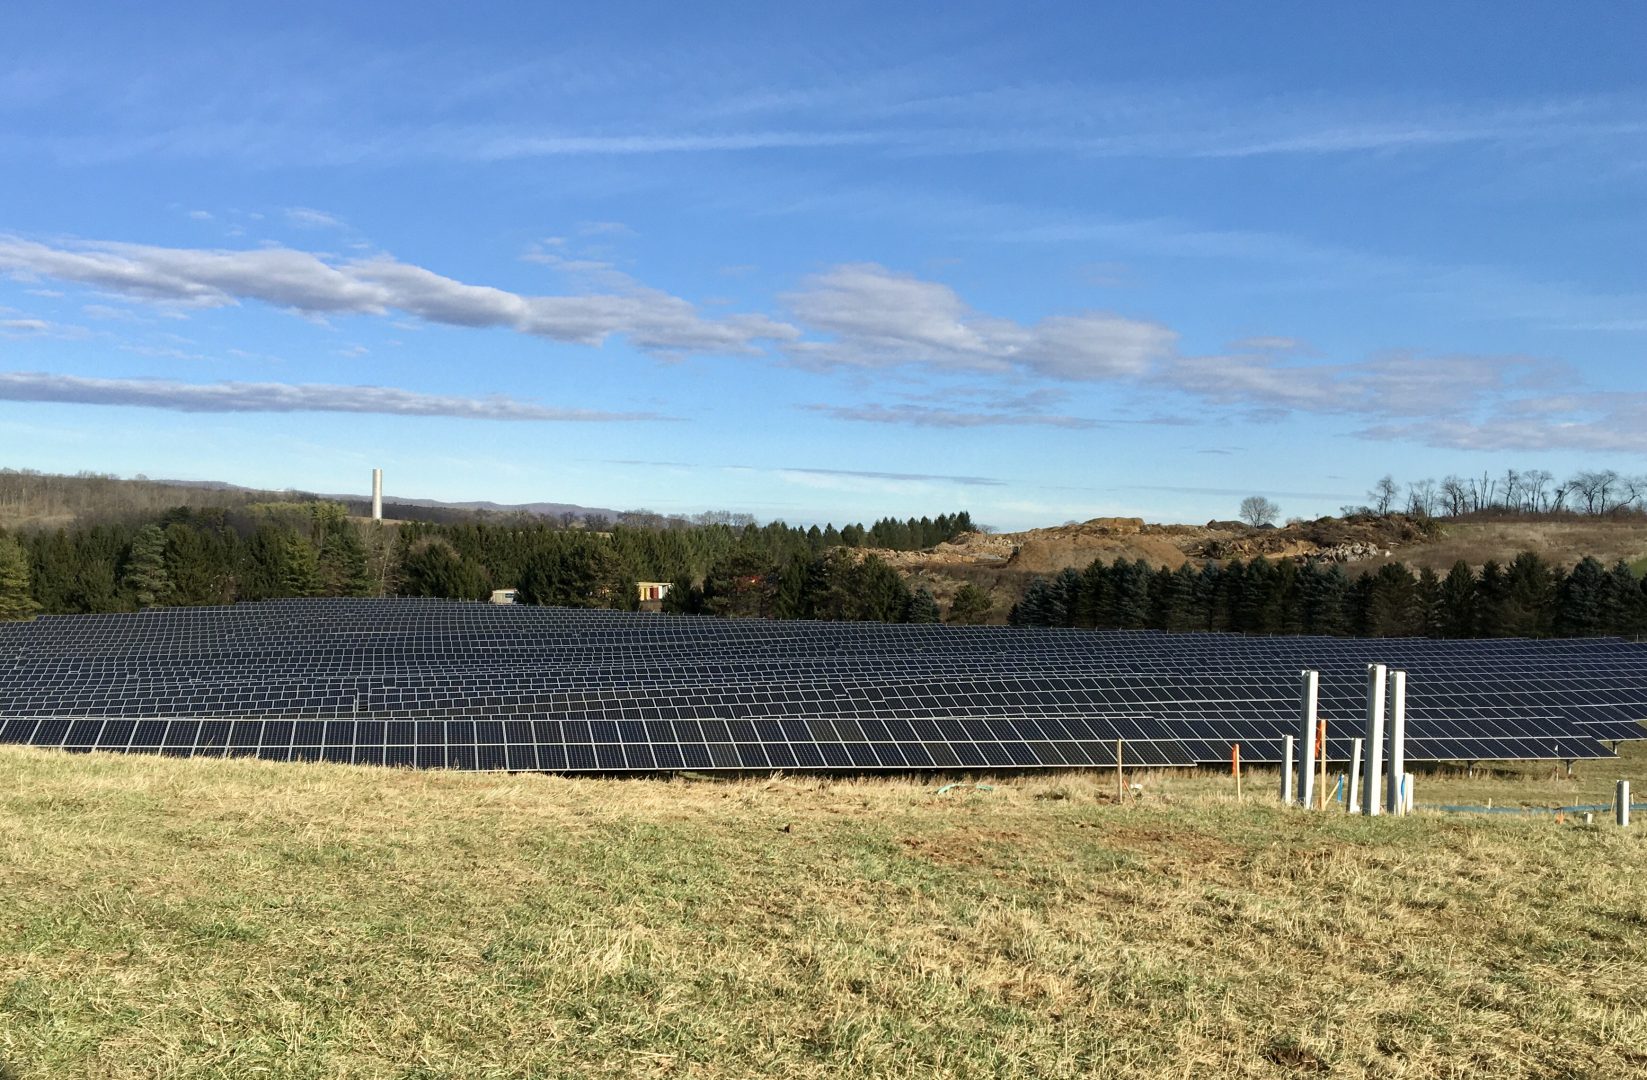 Solar panels that are part of the University Area Joint Authority's solar array in Centre County, Pennsylvania.